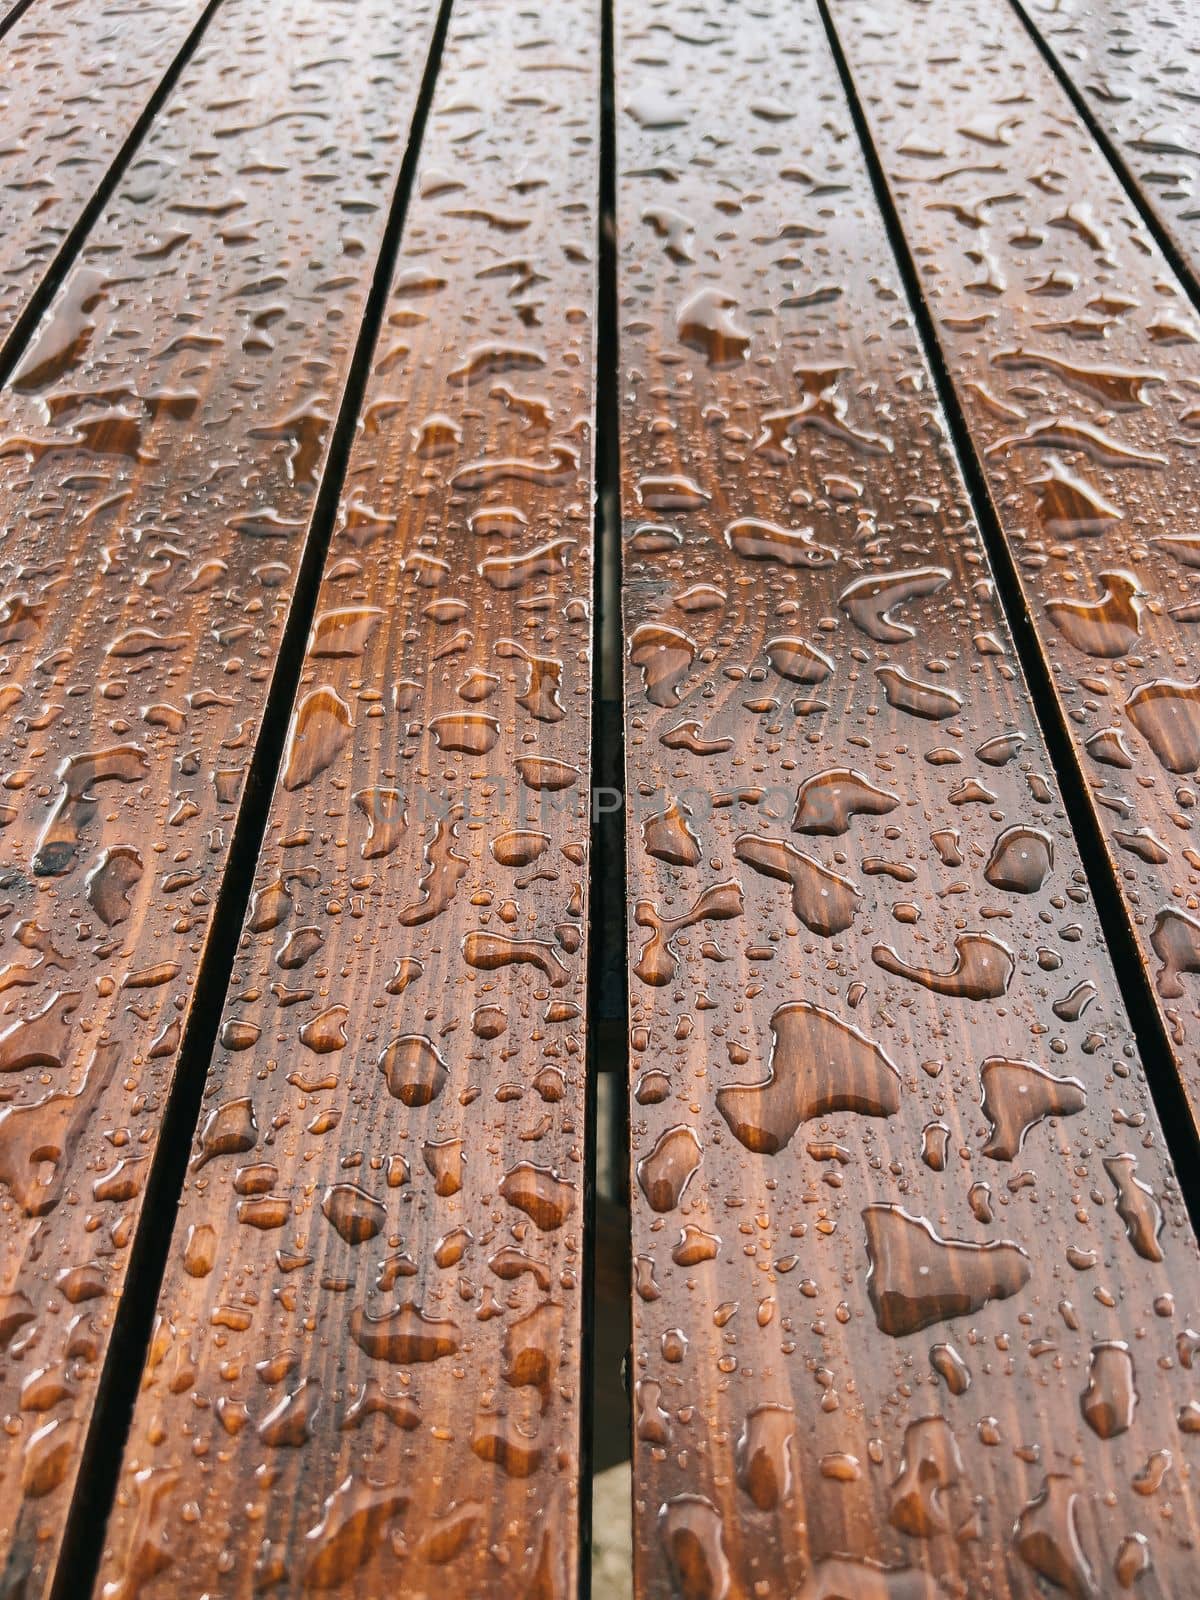 Raindrops on a brown wooden surface. Close-up by Nadtochiy